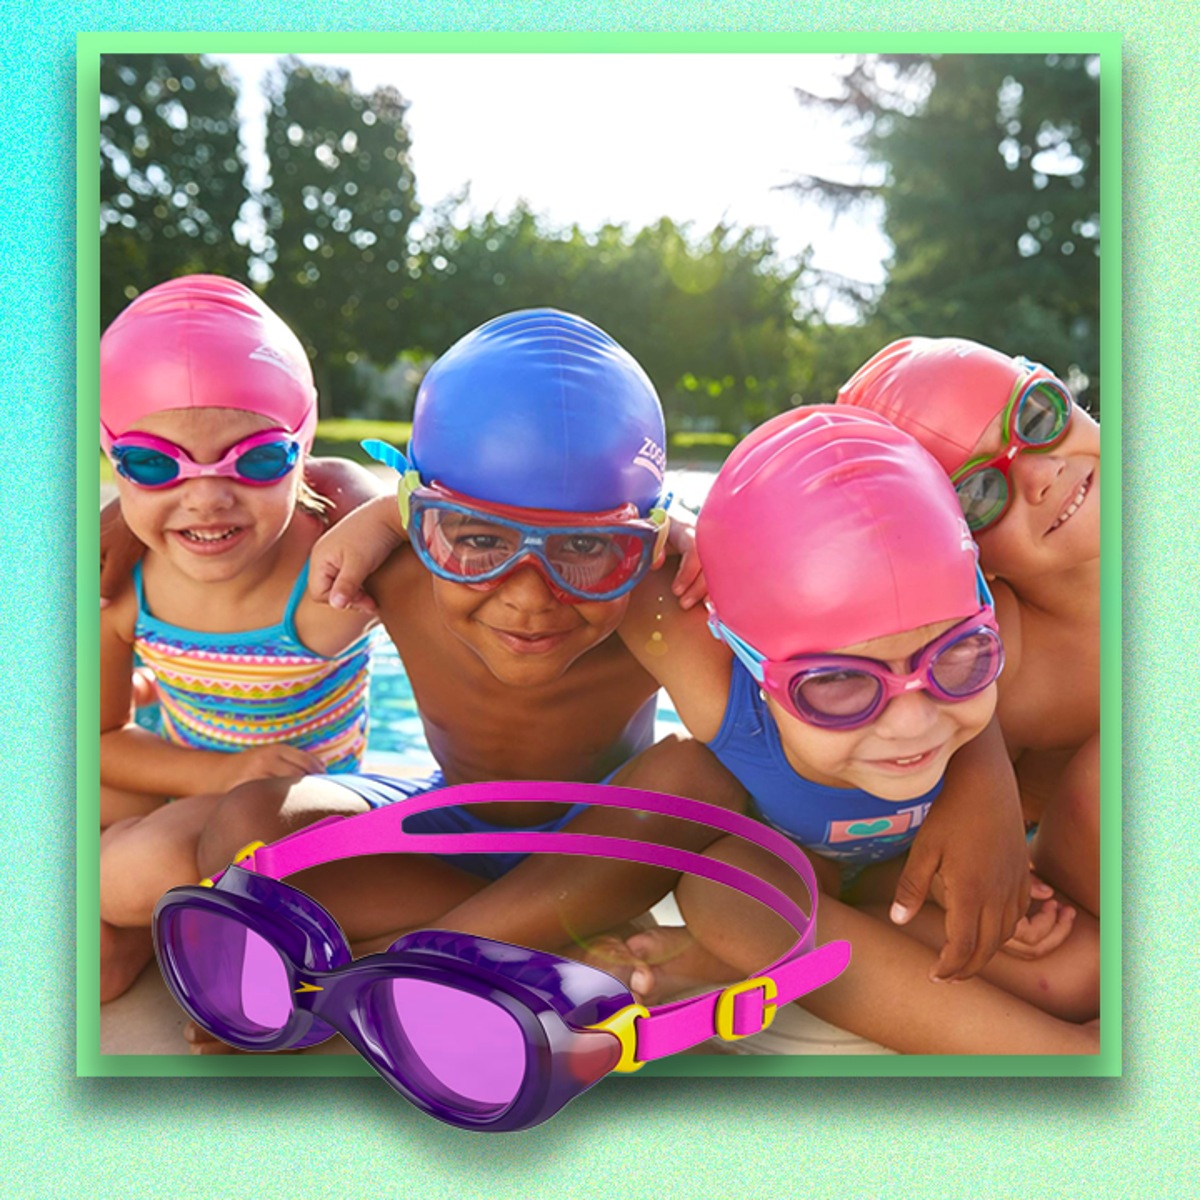 https://static.independent.co.uk/2024/04/12/17/Kids-goggles-hero-indybest-sq.png?quality=75&width=1200&auto=webp